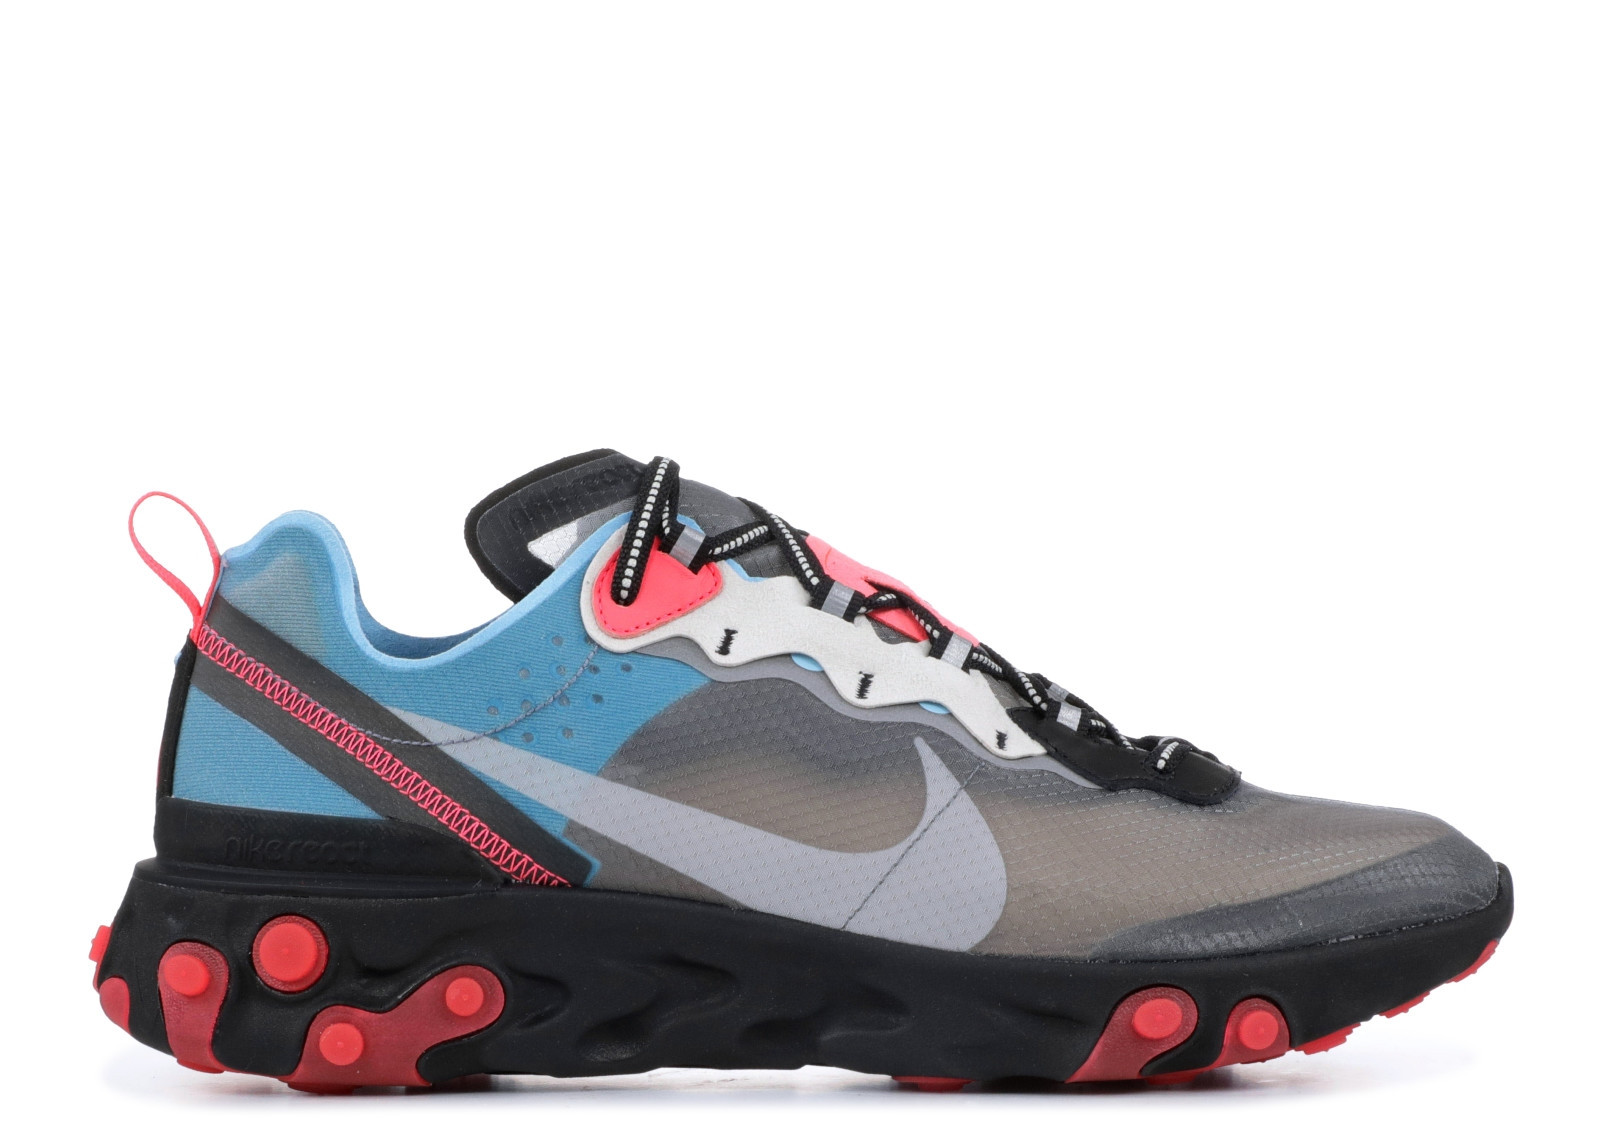 Nike React Element 87 Blue Chill "Solar Red"